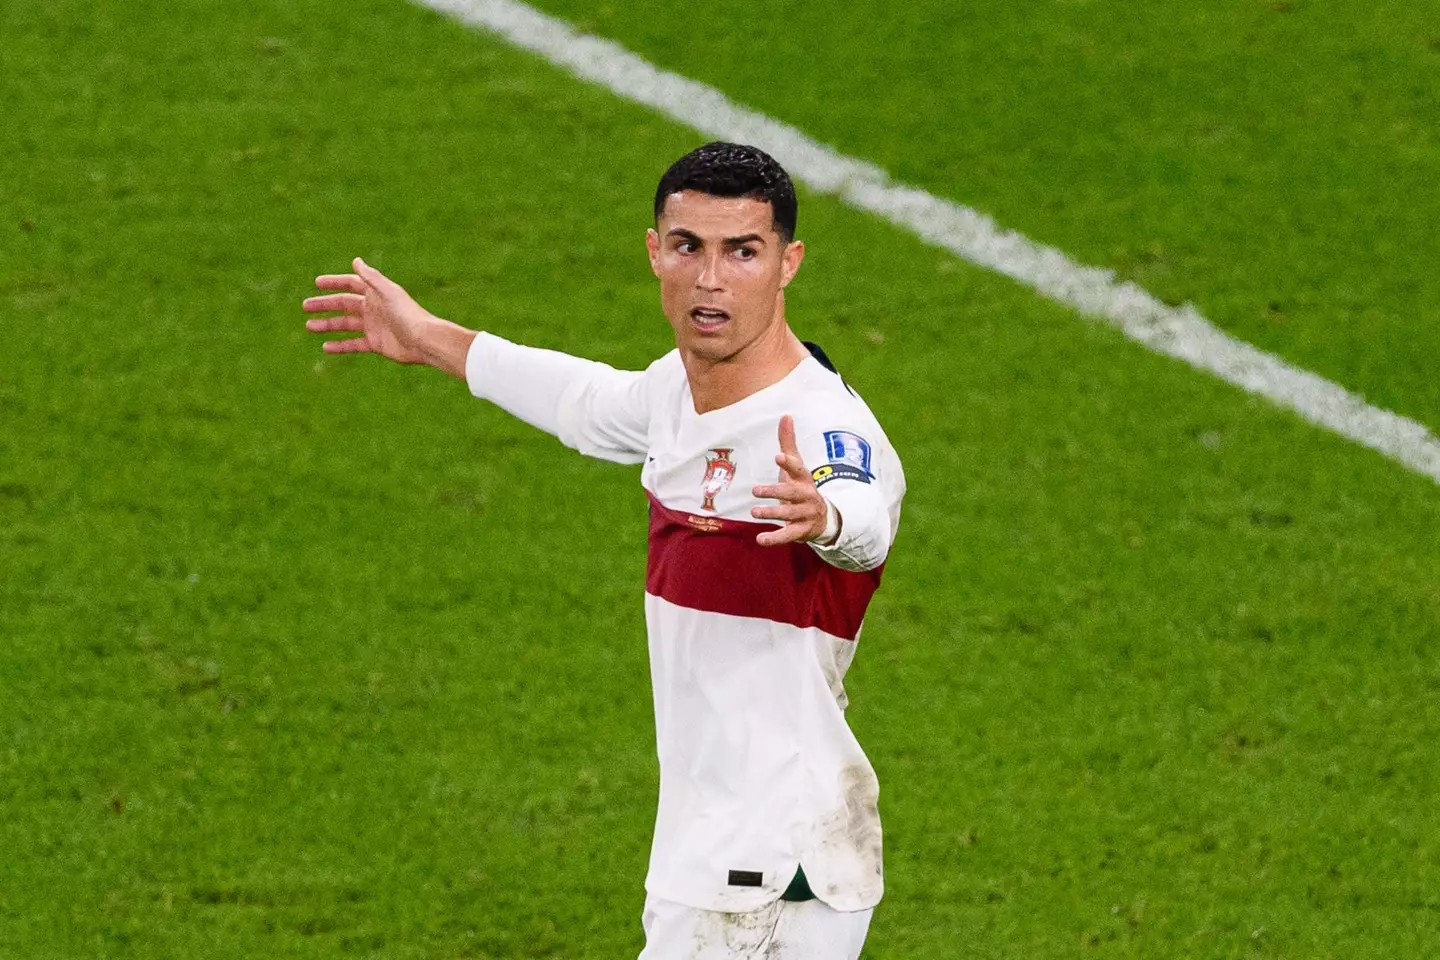 Cristiano Ronaldo in action for Portugal during the World Cup. Image: Alamy 